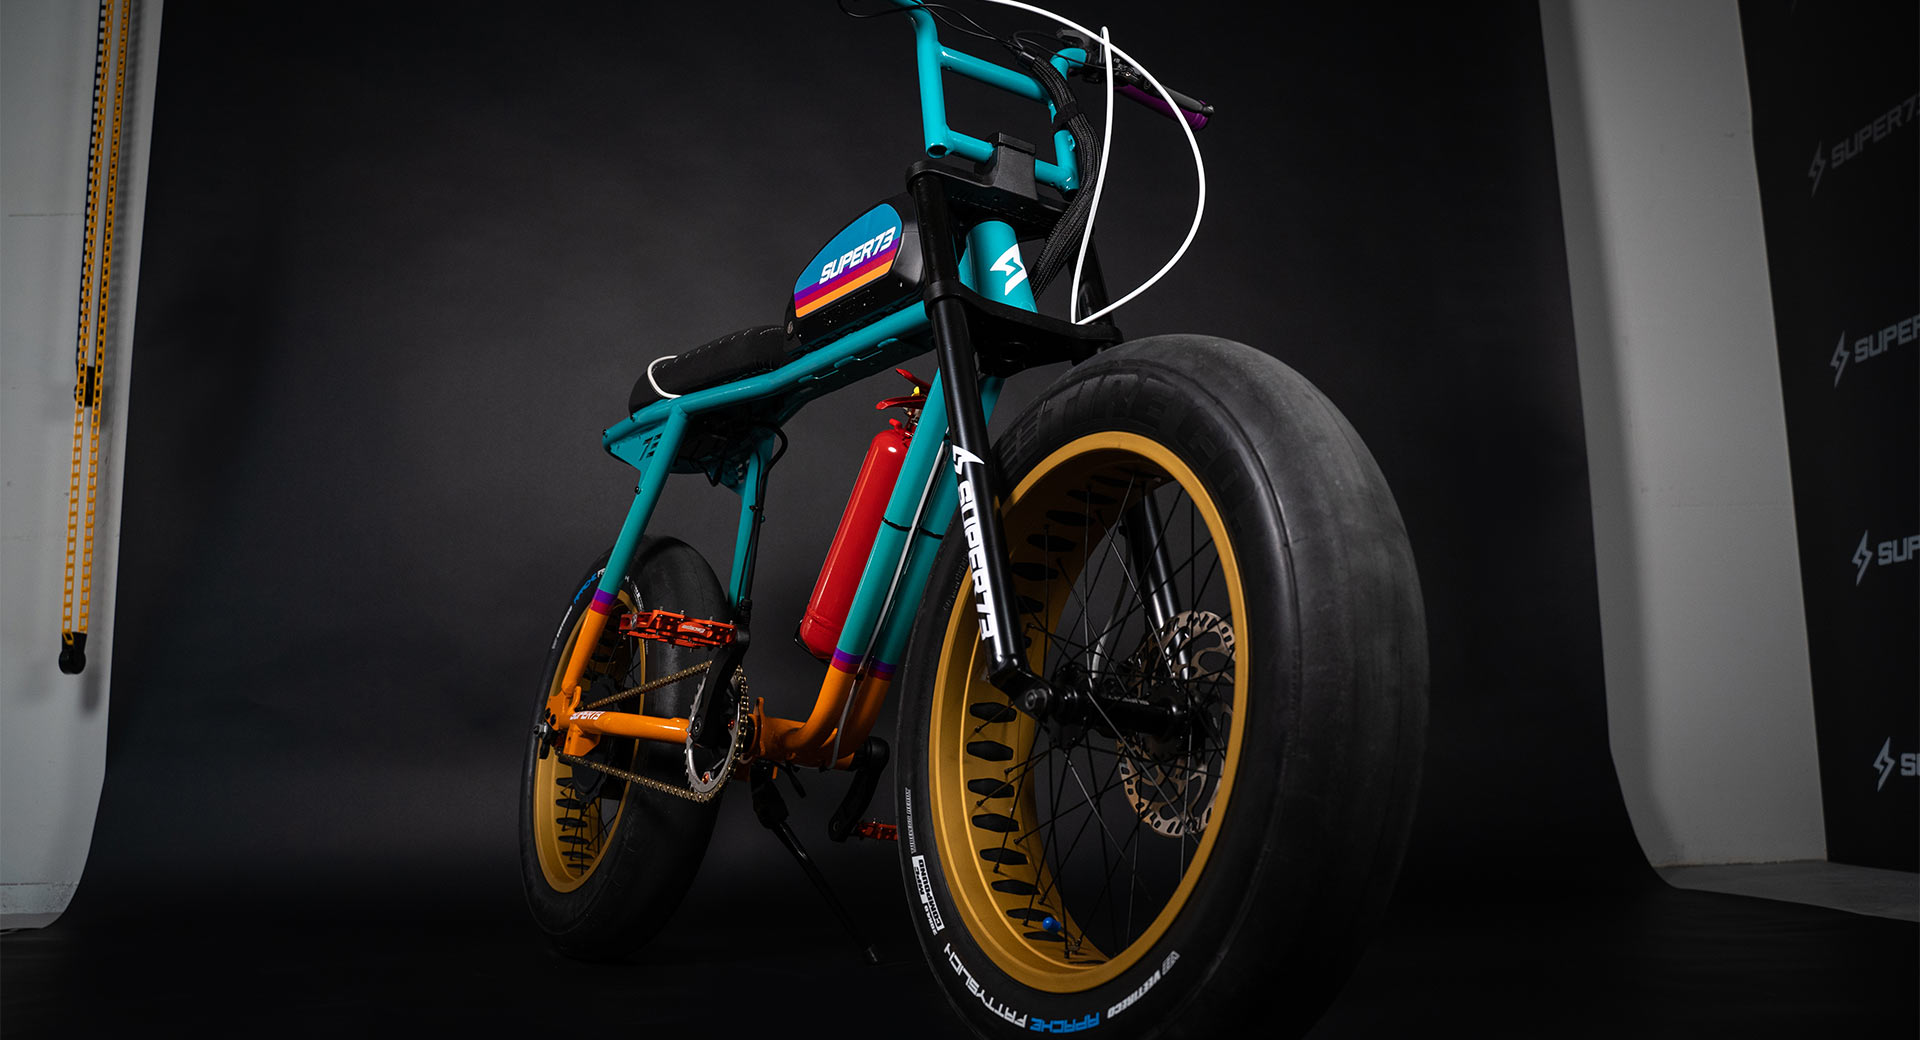 SUPER73s Latest E-Bike Is Inspired By Porsche 935 That Won Le Mans In 1979 Carscoops